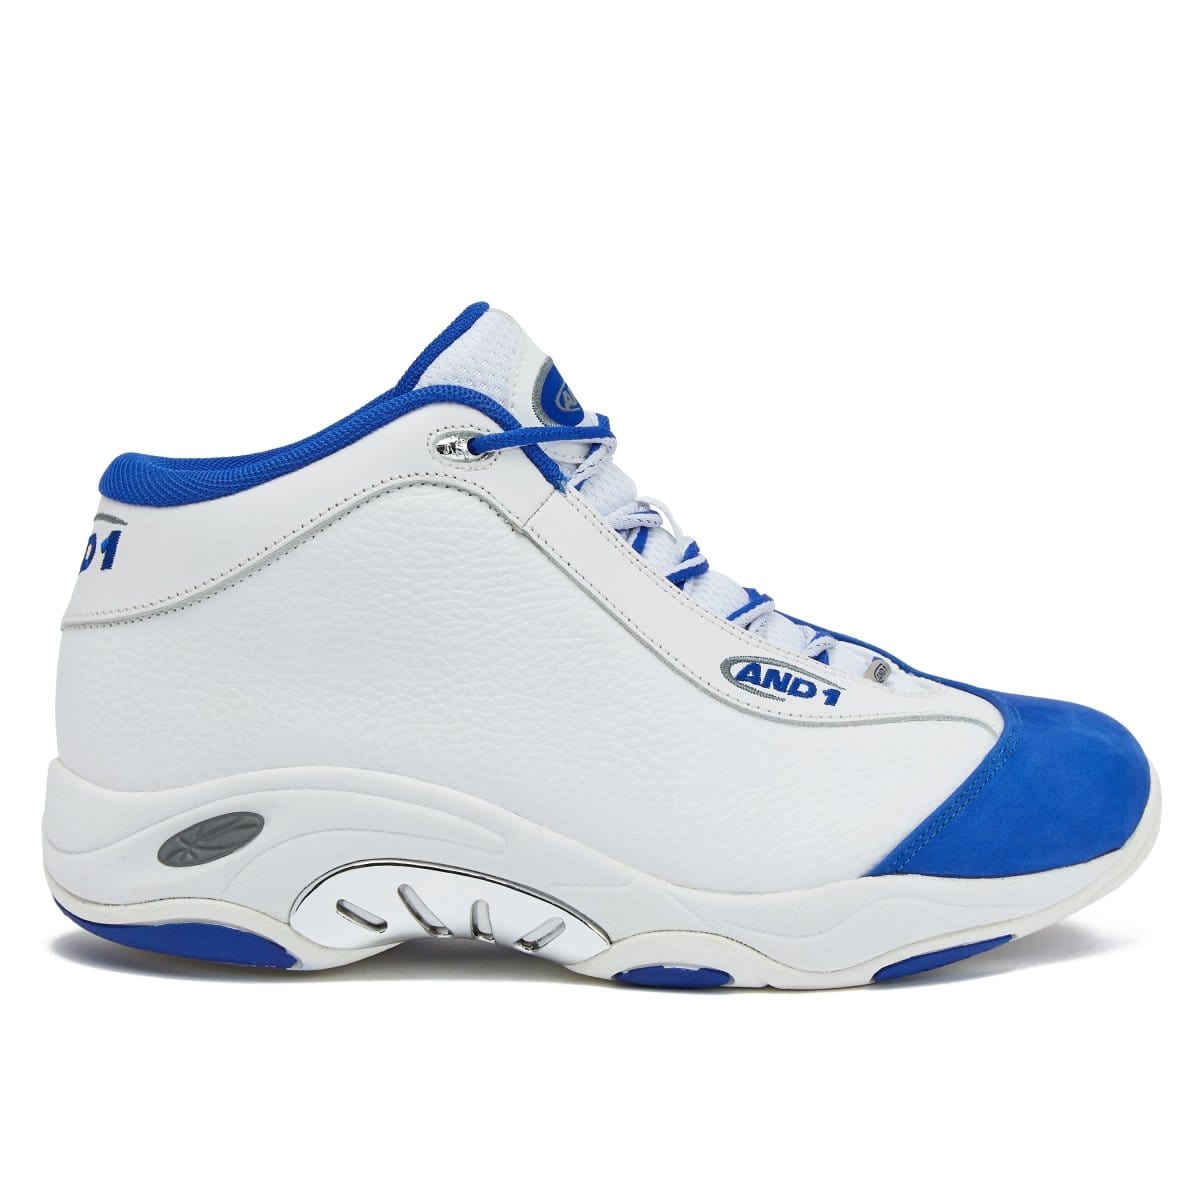 AND-1 AND-1 MEN'S TAI CHI WHITE/BLUE BASKETBALL SHOES - INSPORT